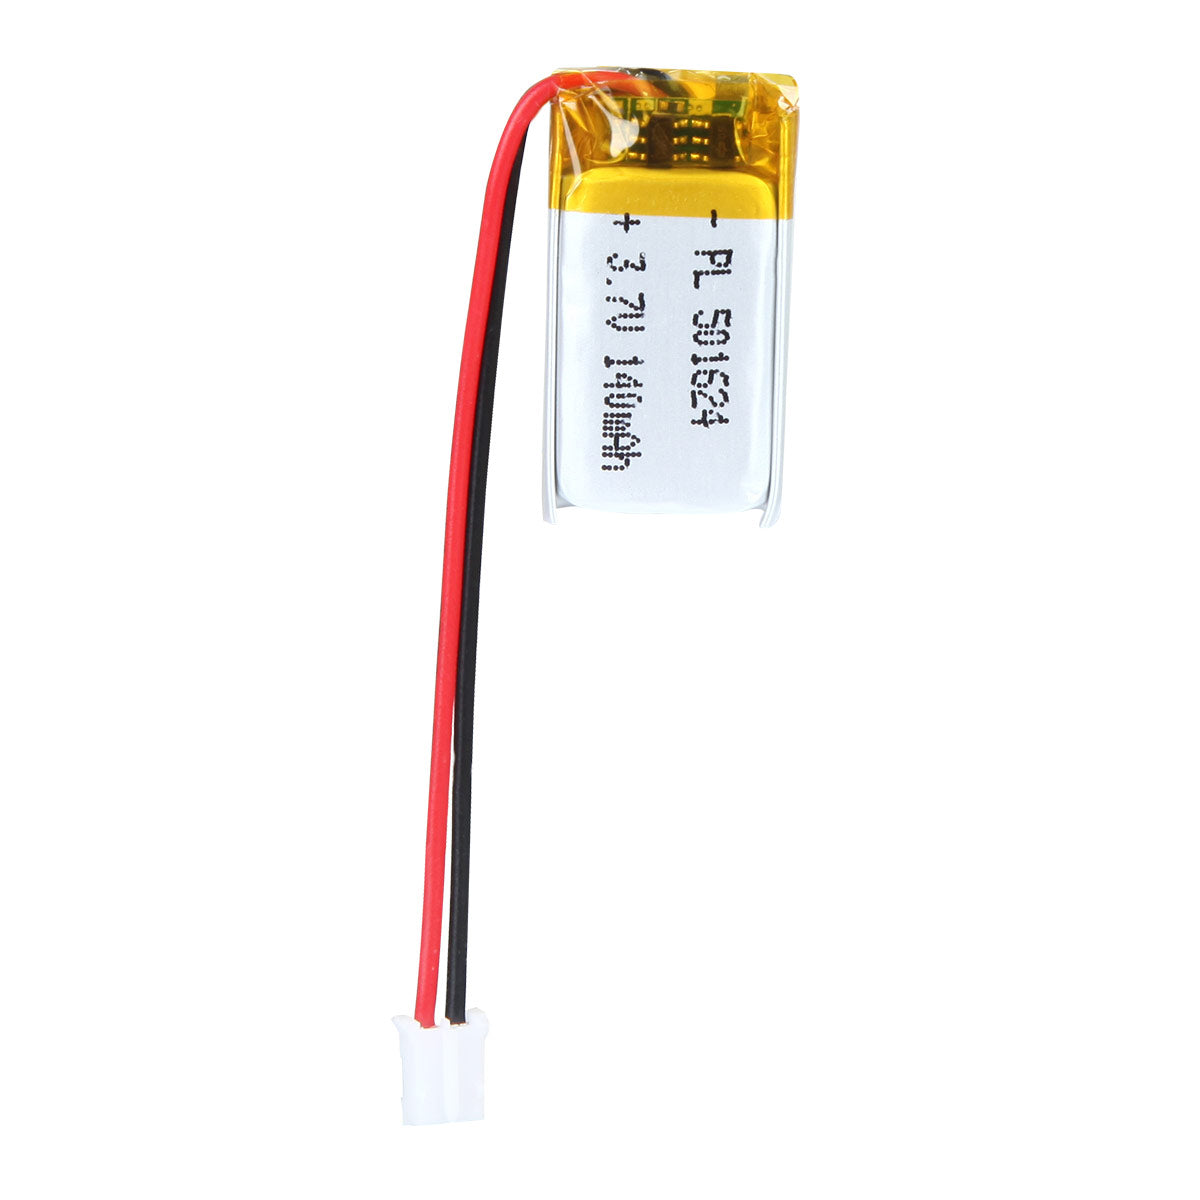 YDL 3.7V 140mAh 501624 Rechargeable Lithium Polymer Battery Length 26mm